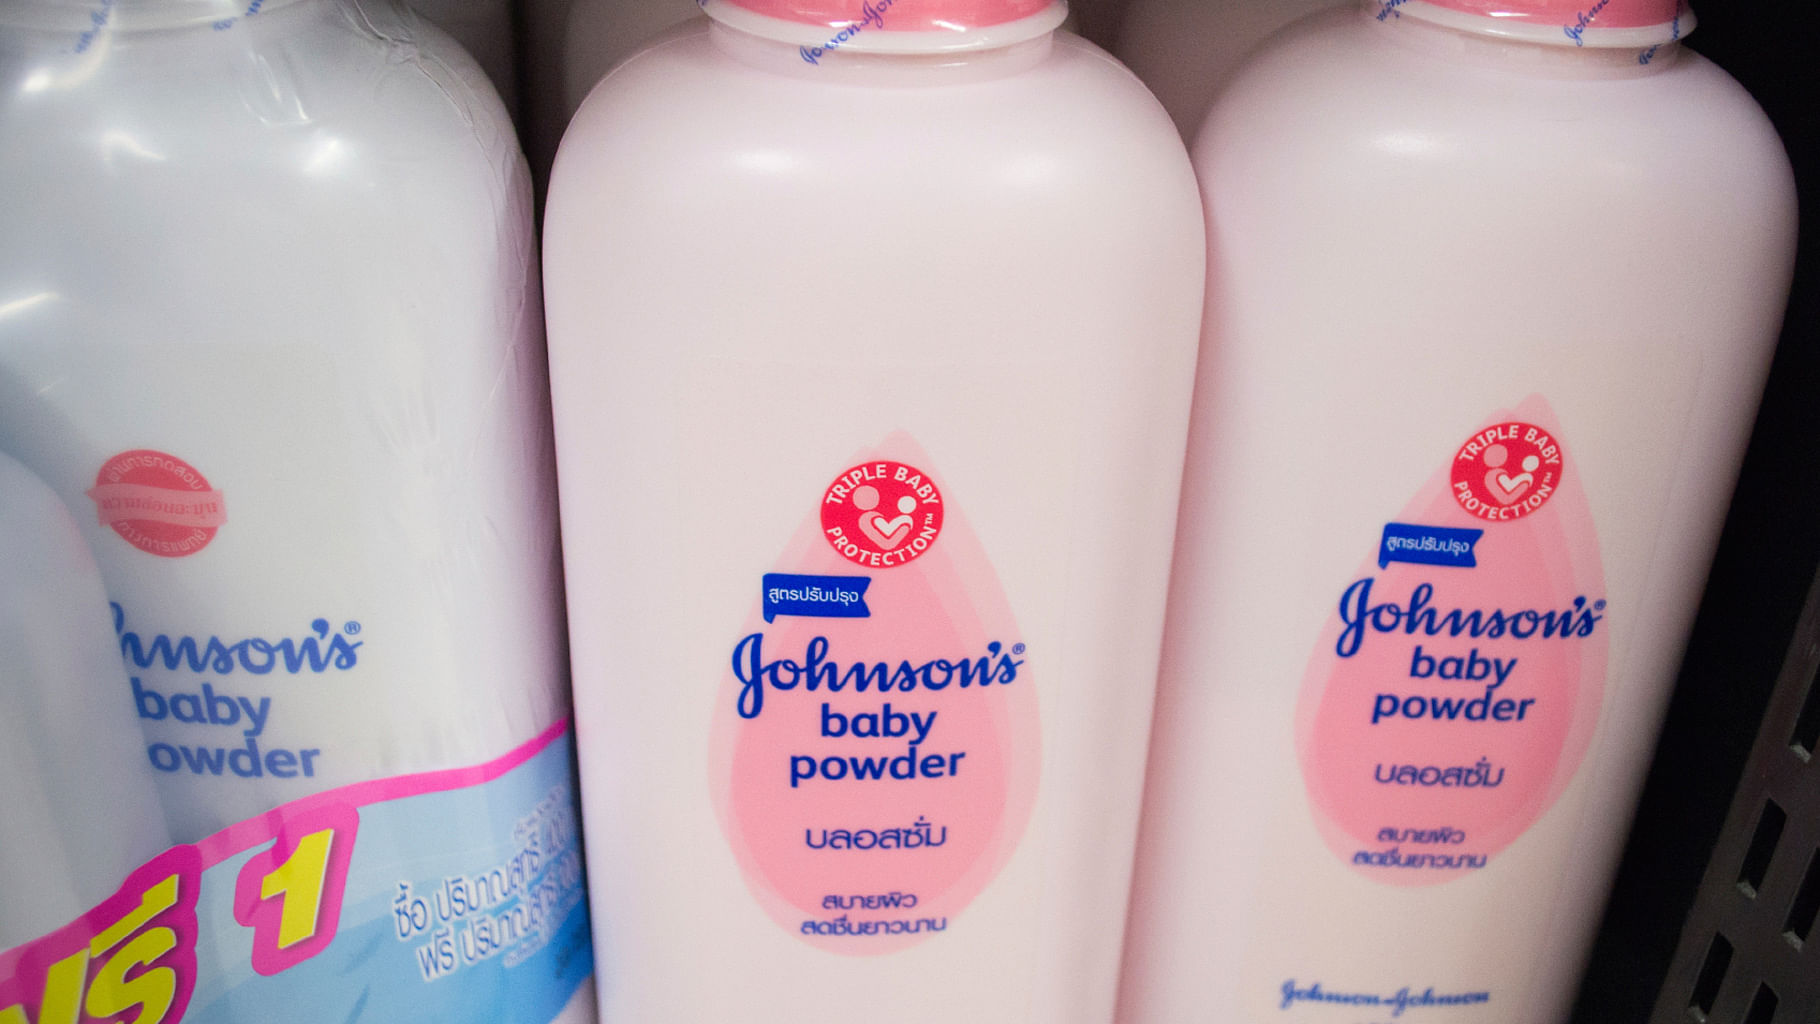 A recent investigation by <a href="https://www.reuters.com/investigates/special-report/johnsonandjohnson-cancer/">Reuters</a> claimed that the talcum powder was contaminated by carcinogenic asbestos.